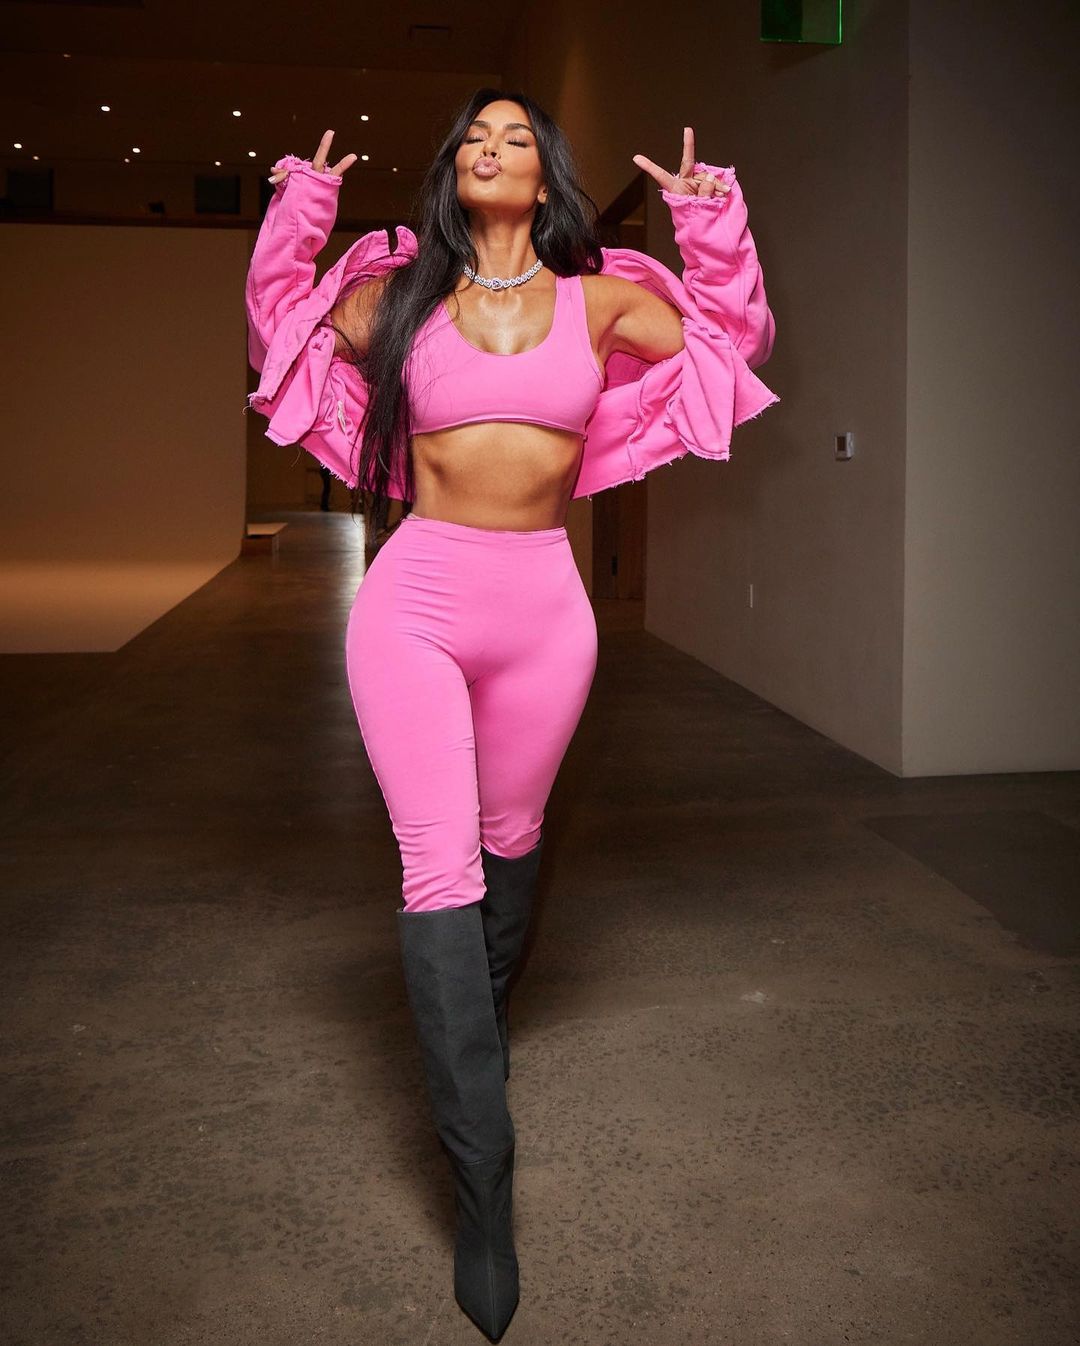 Kim Kardashian in GREG ROSS Pink Color Outfit snaps, Feb 2023